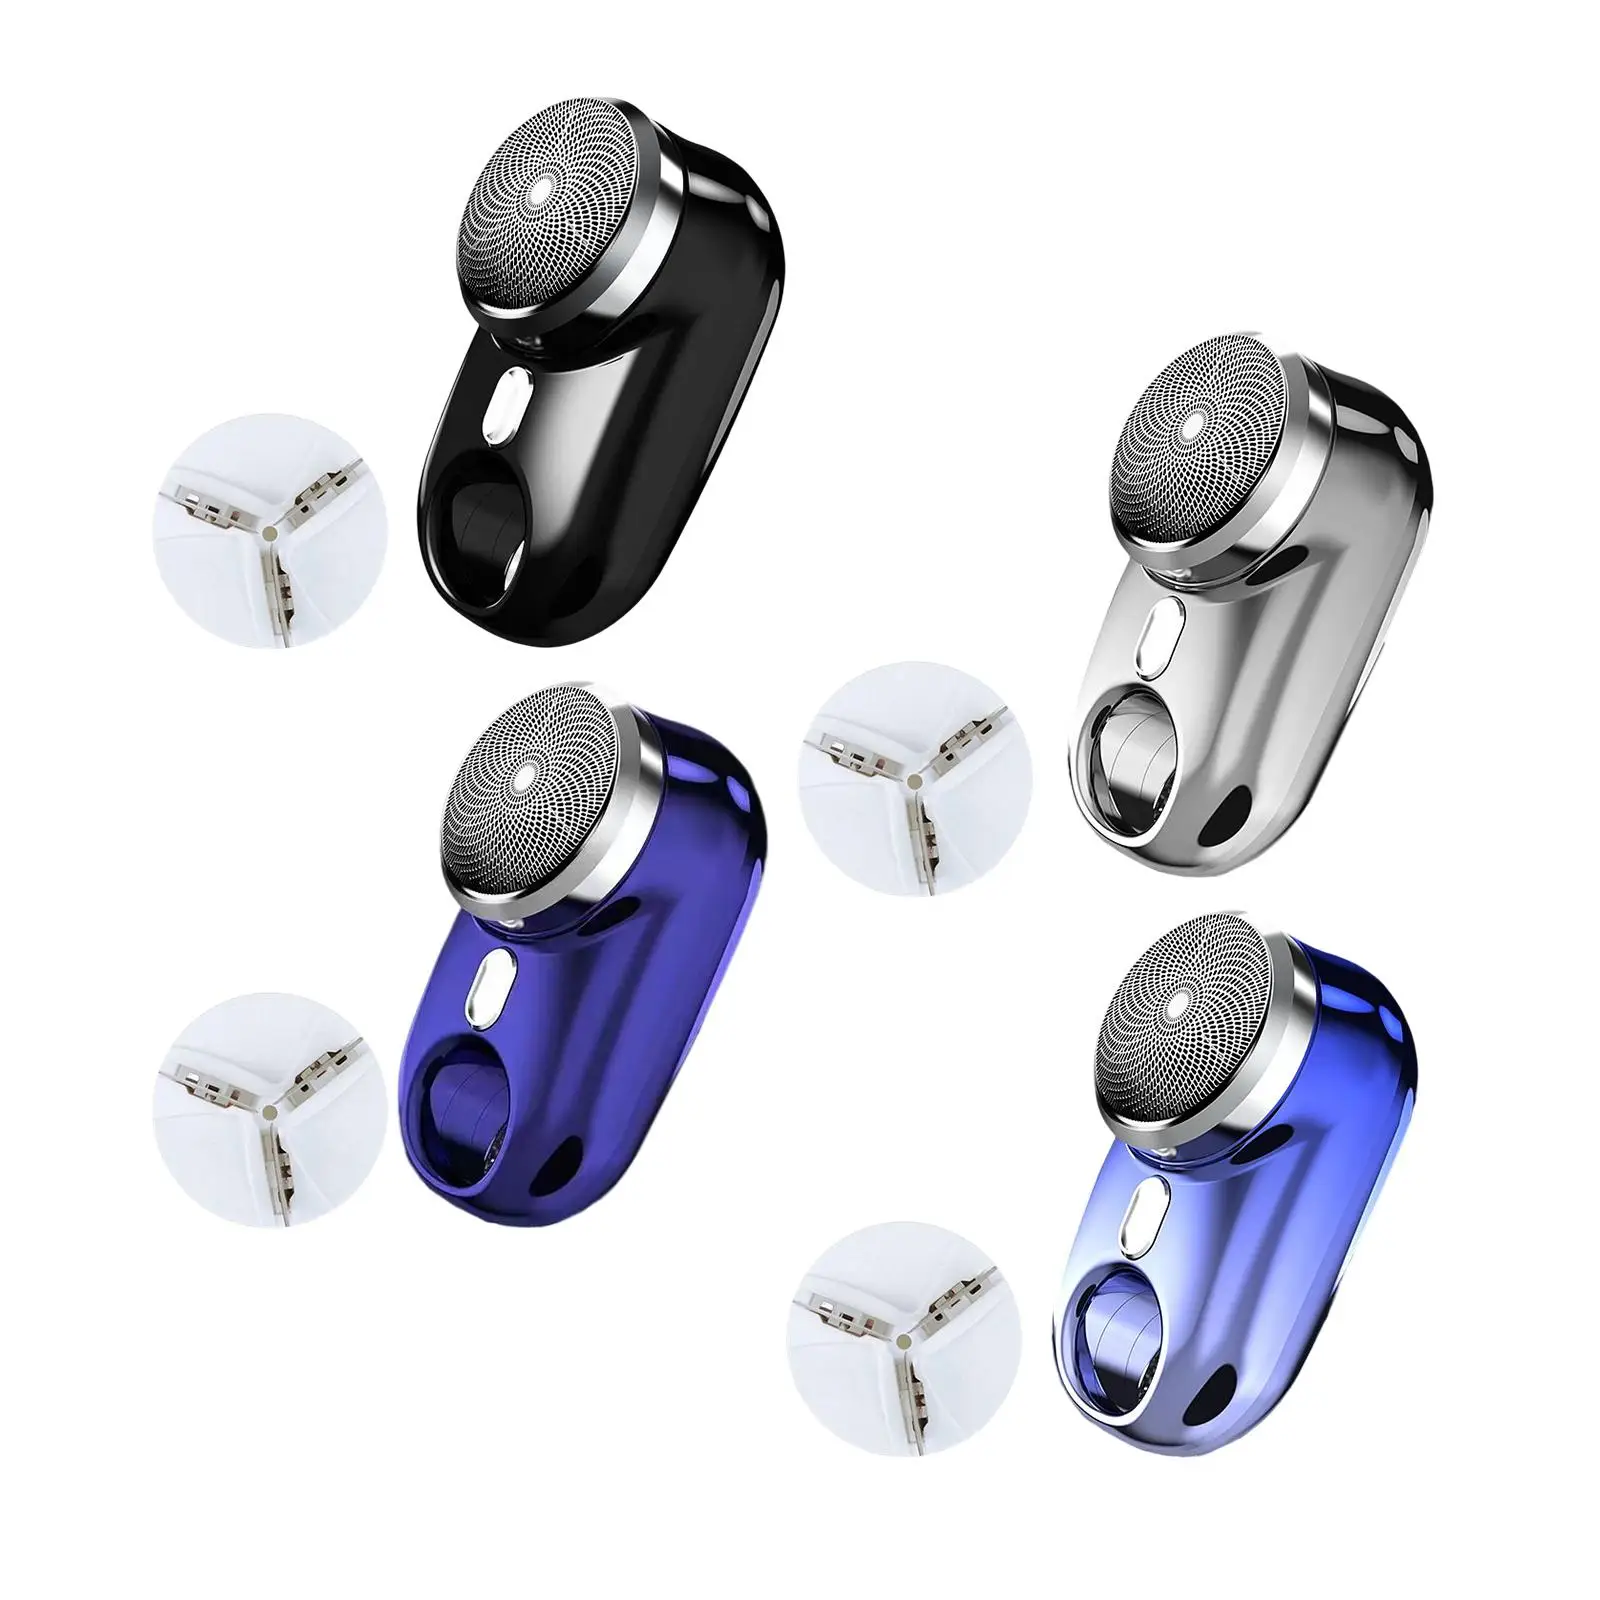 Electric Shaver Stainless Steel with Colorful Ambient Lights for Travel Home